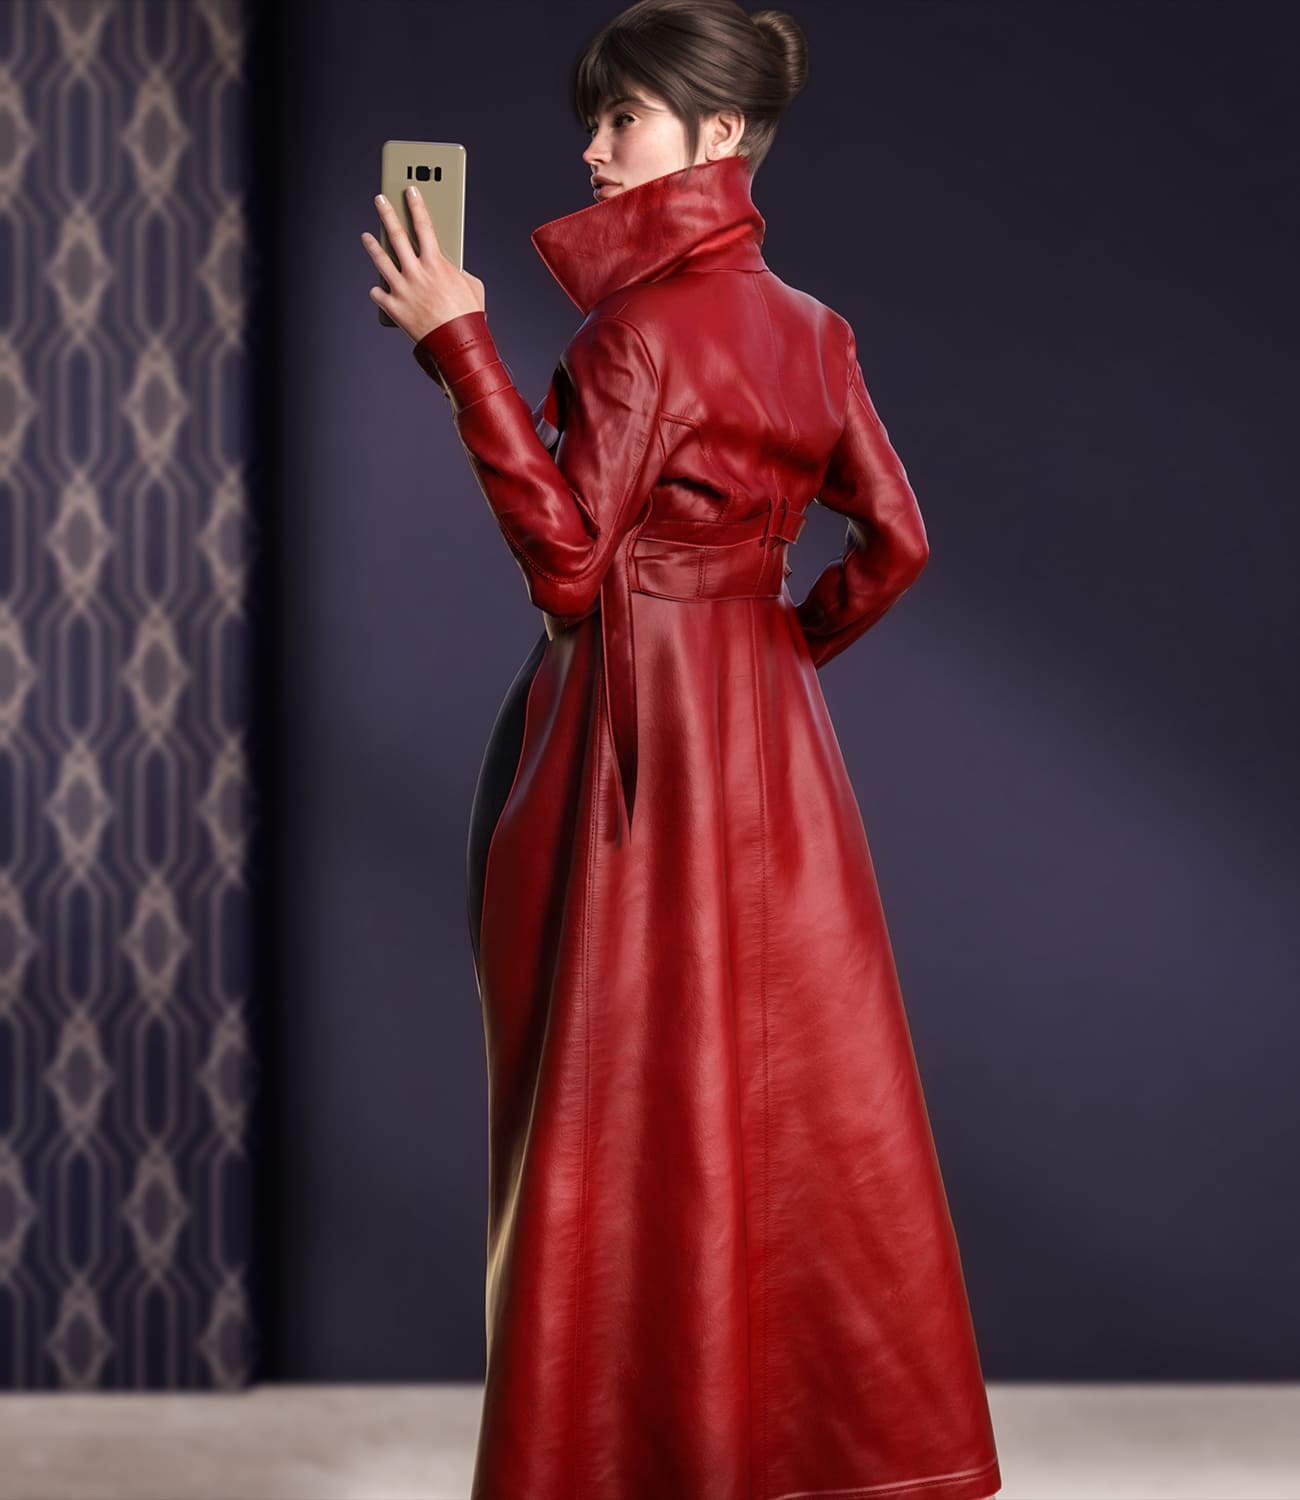 Trench Coat dforce outfit for Genesis 8 & 8.1 Females_DAZ3D下载站